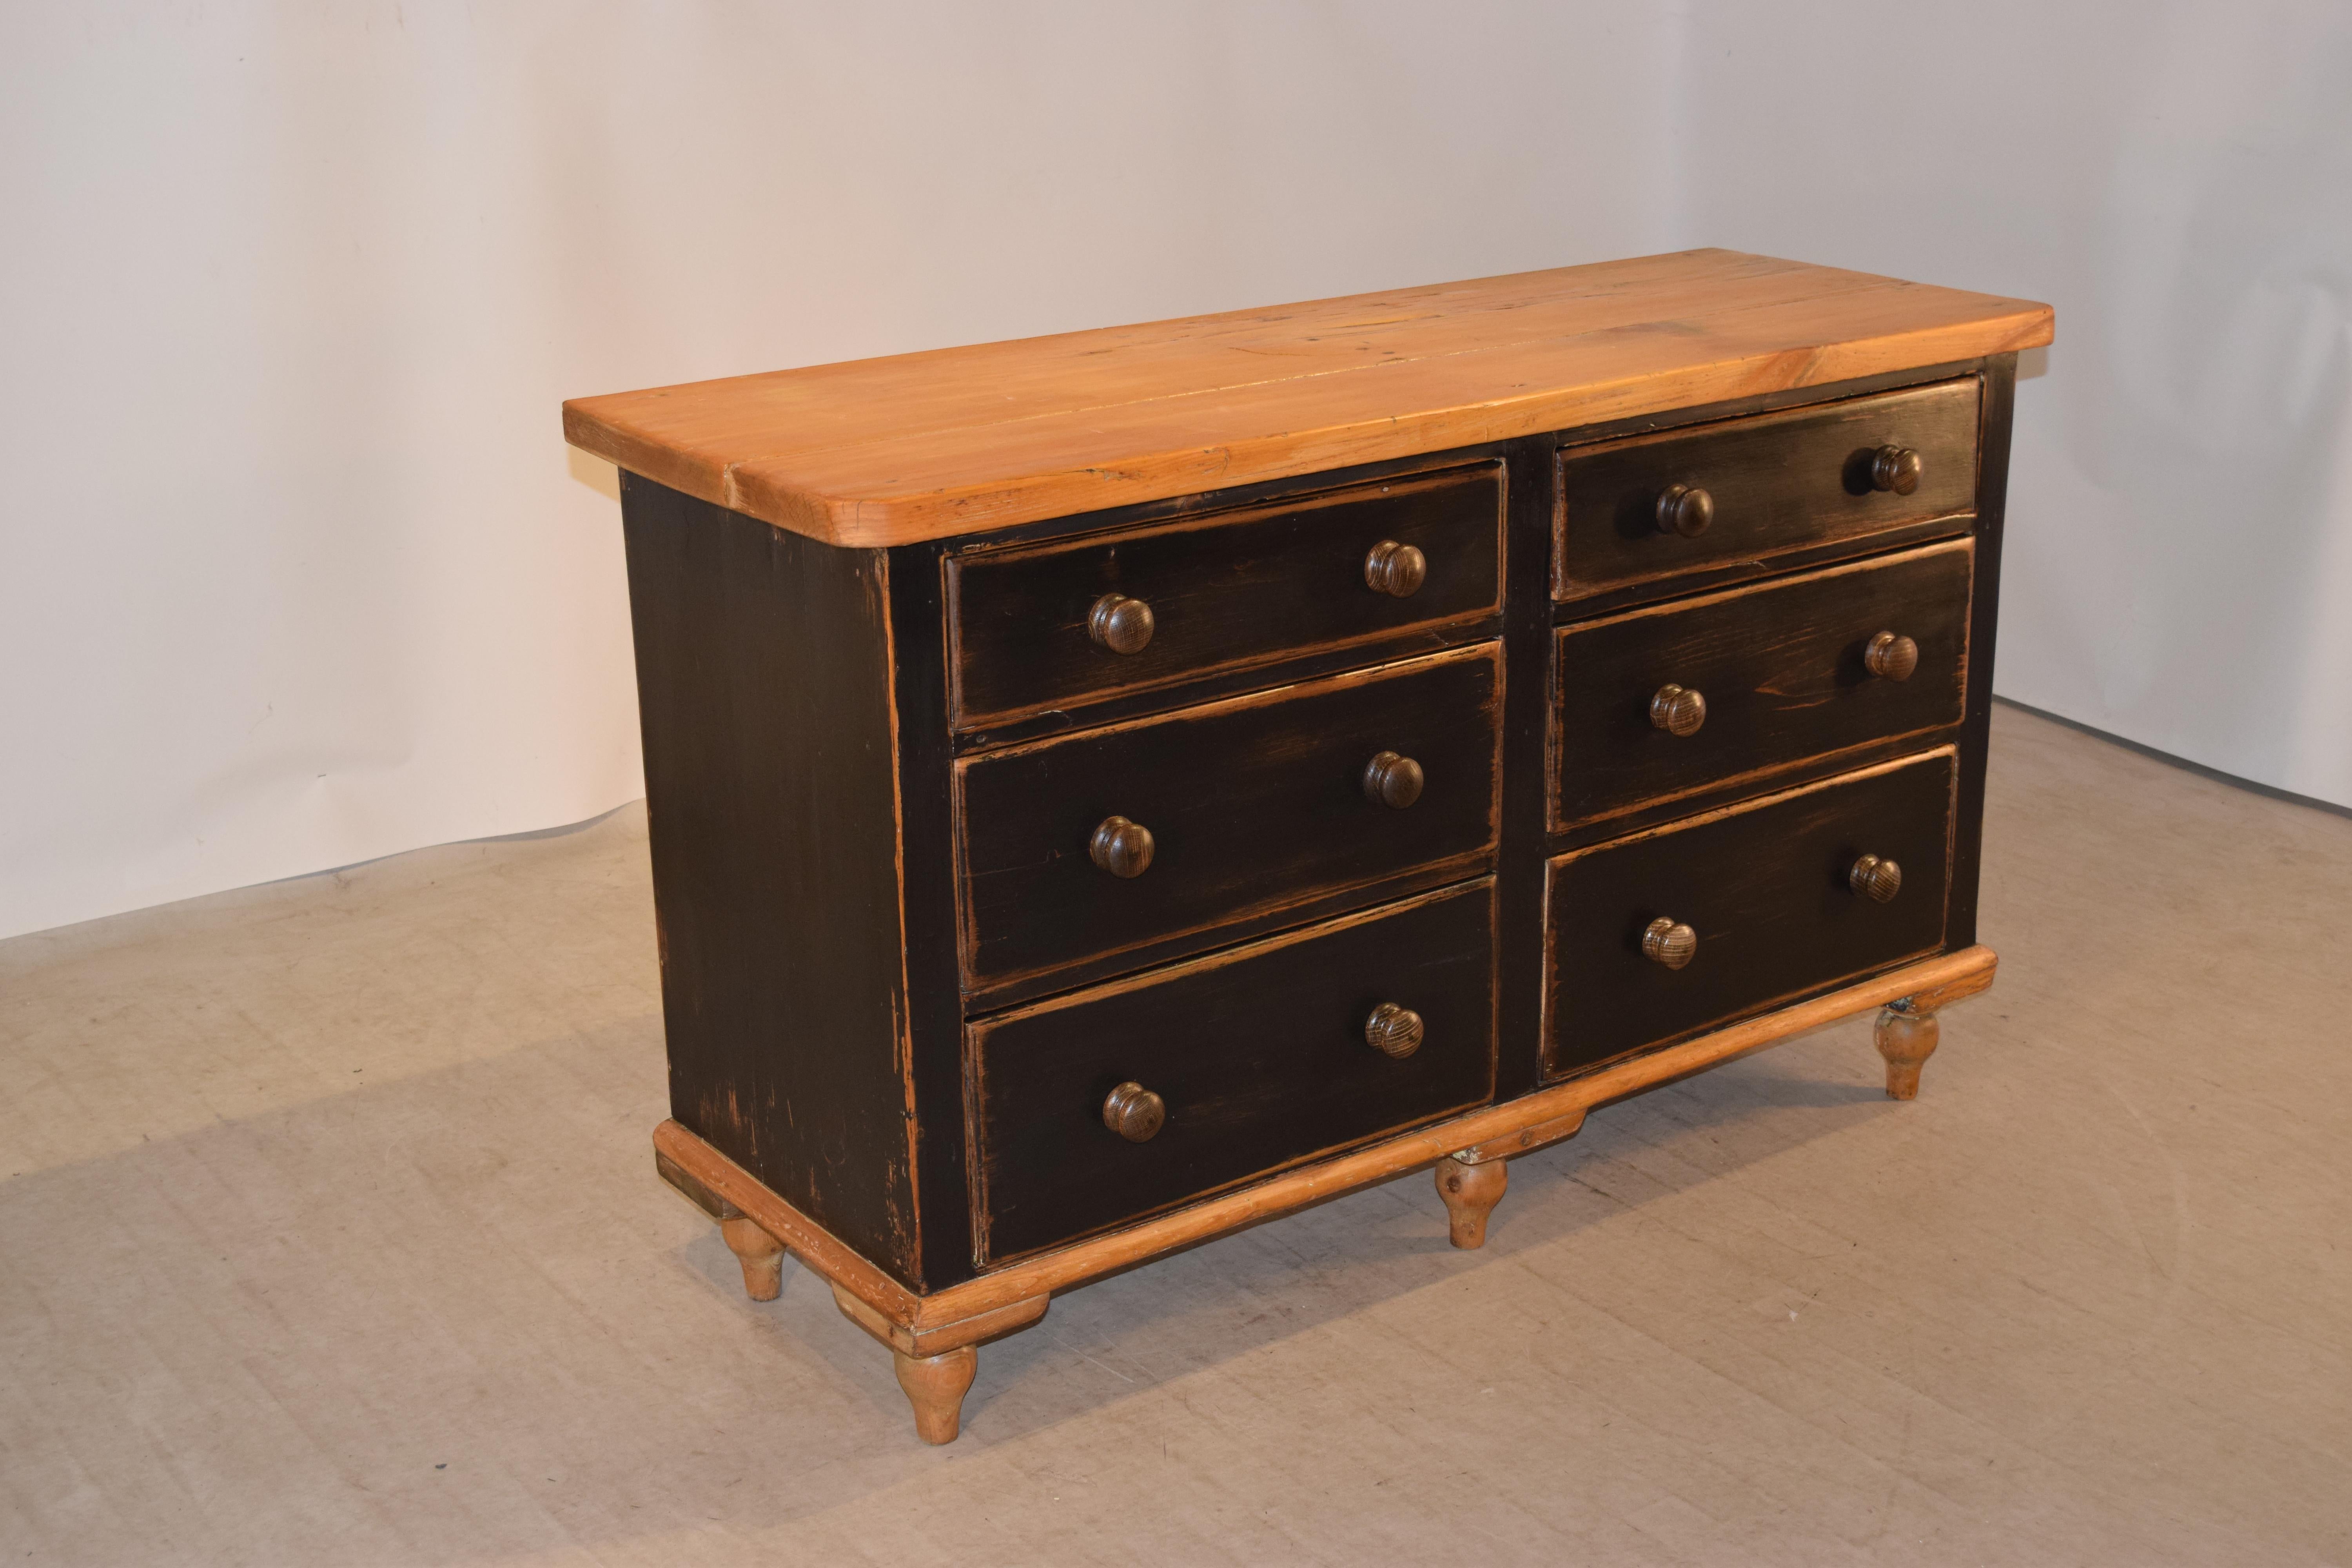 19th century pine dresser base from England with a thick top following down to simple case containing six drawers over a simple molding and hand-turned feet.